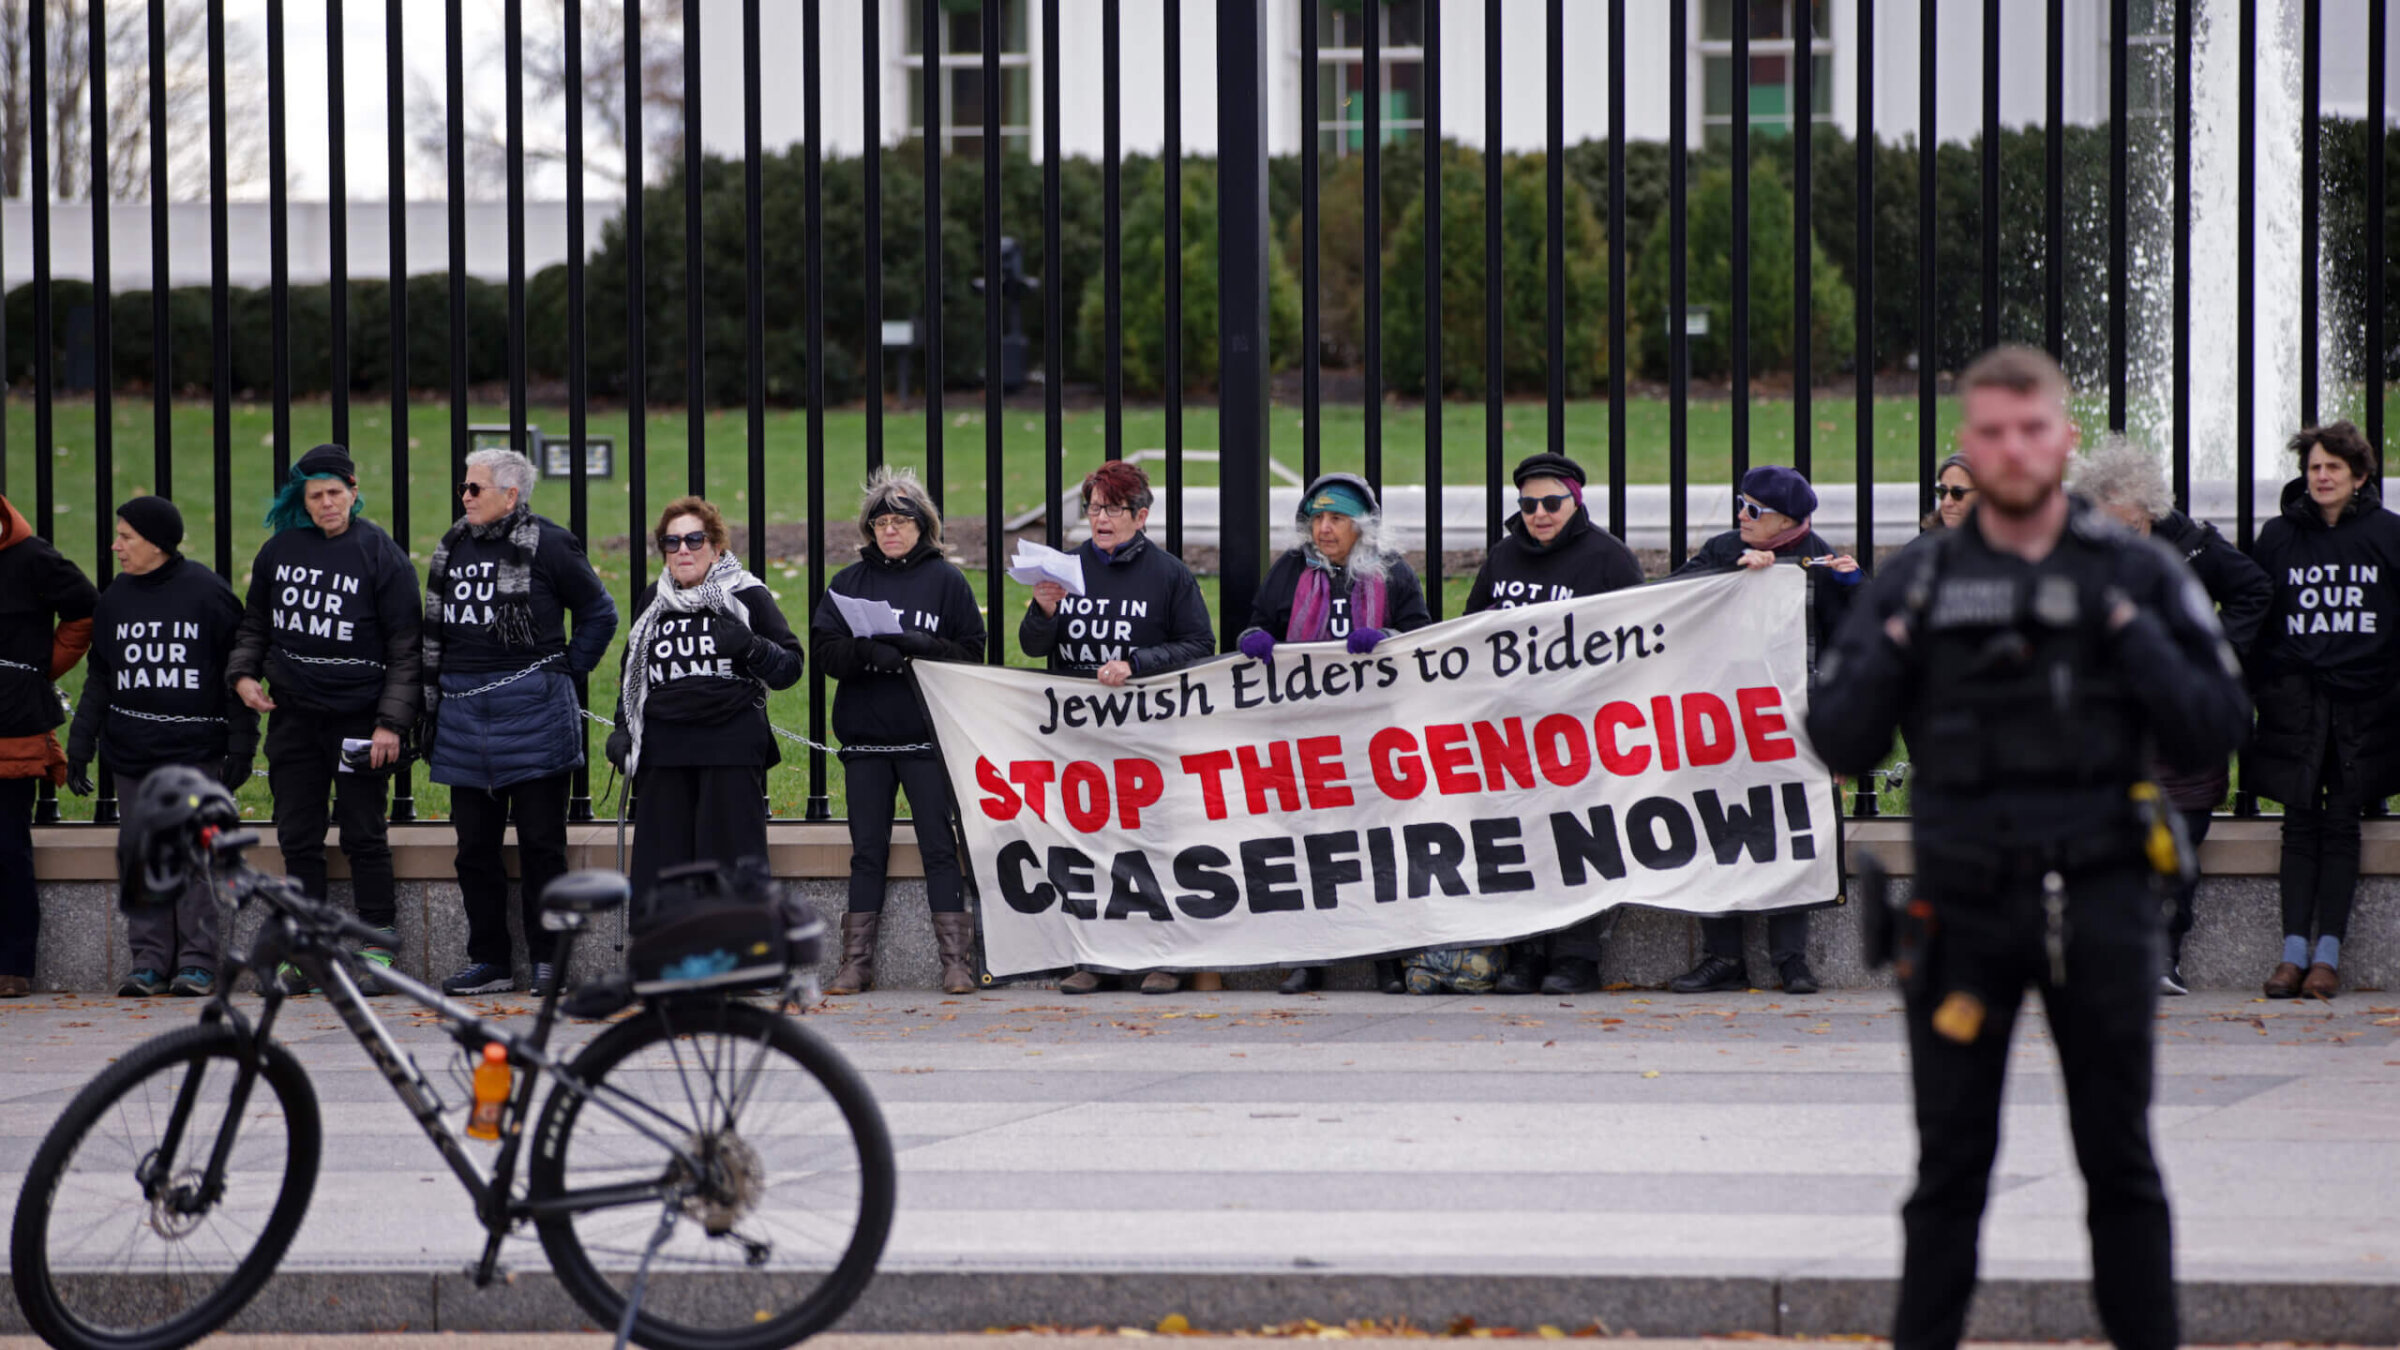 Jewish activists carrying a sign reading "Jewish Elders to Biden: Stop the Genocide, Cease-fire Now," chained themselves to the fence of the White House in December 2023.